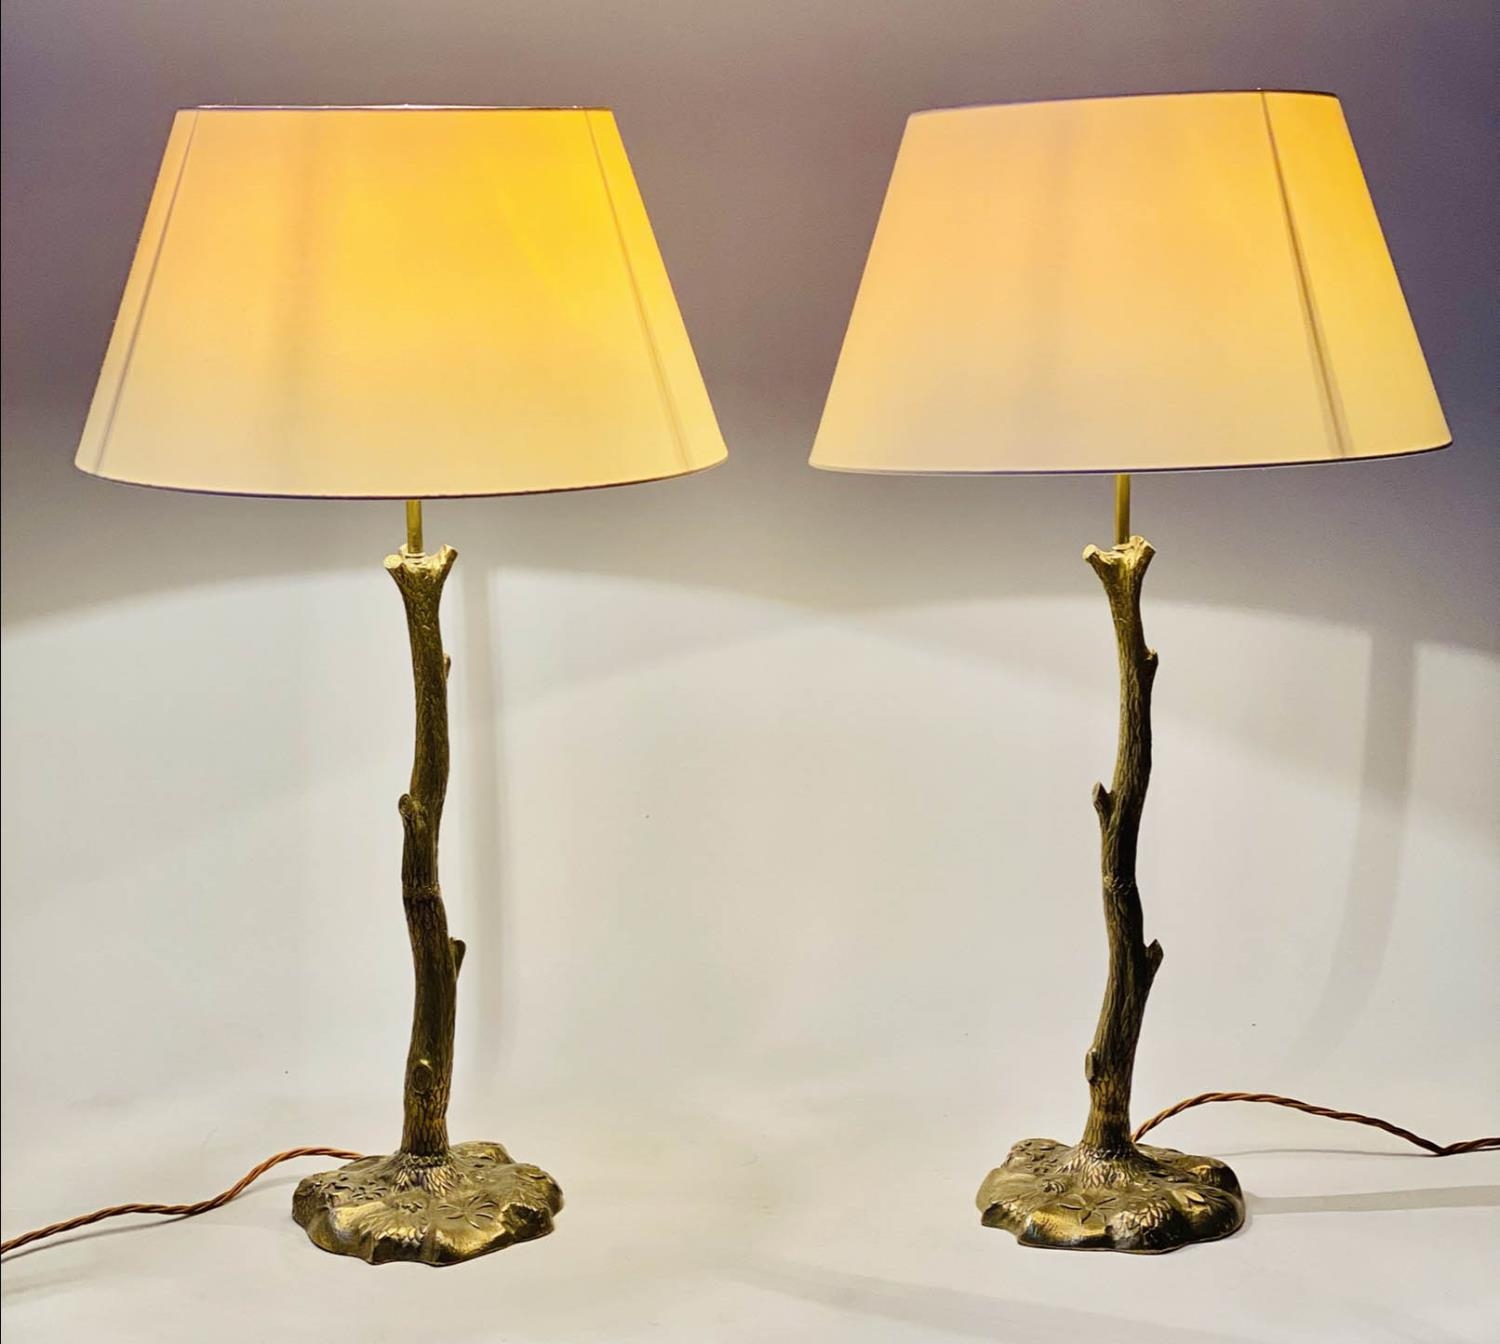 VAUGHAN TABLE LAMPS, a pair Truro twig table lamps in bronze with shades, 77cm H. (2) - Image 6 of 8